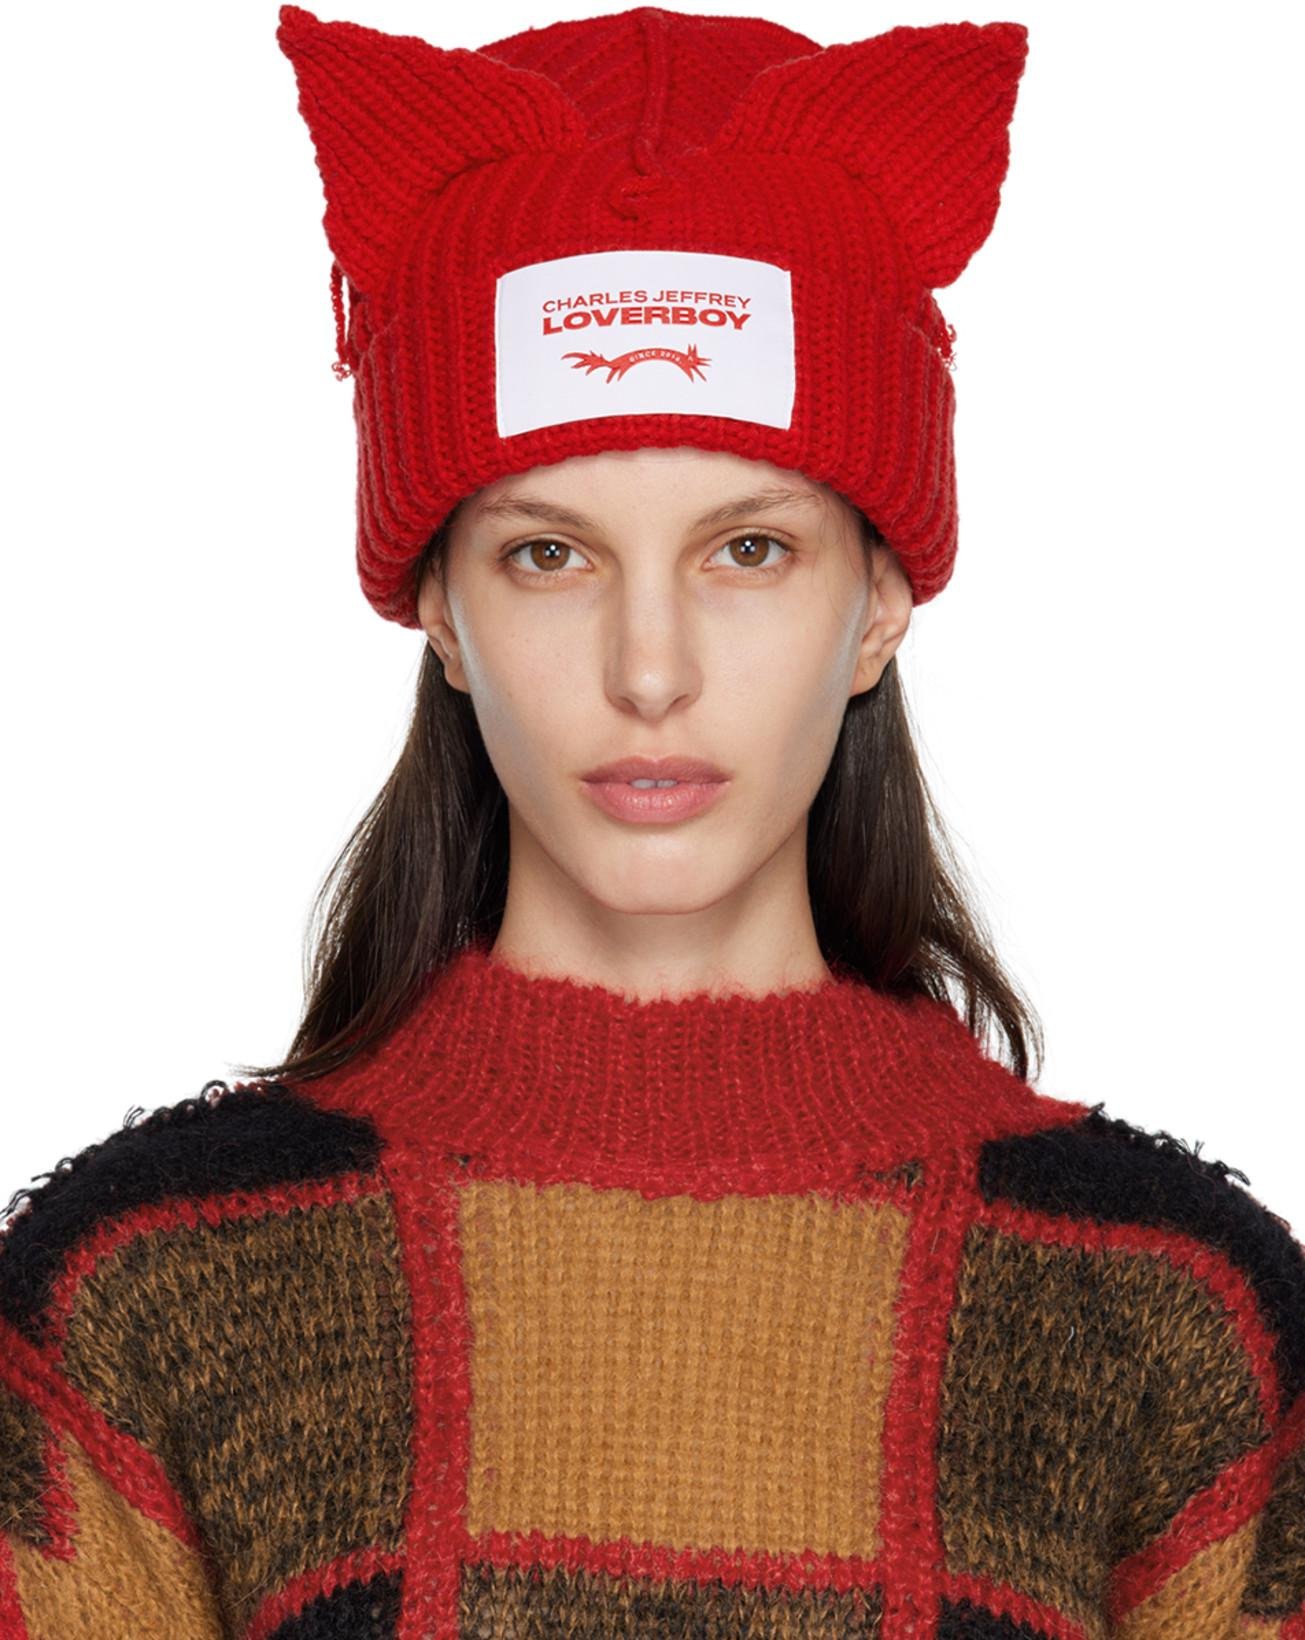 Red Chunky Ears Beanie by CHARLES JEFFREY LOVERBOY